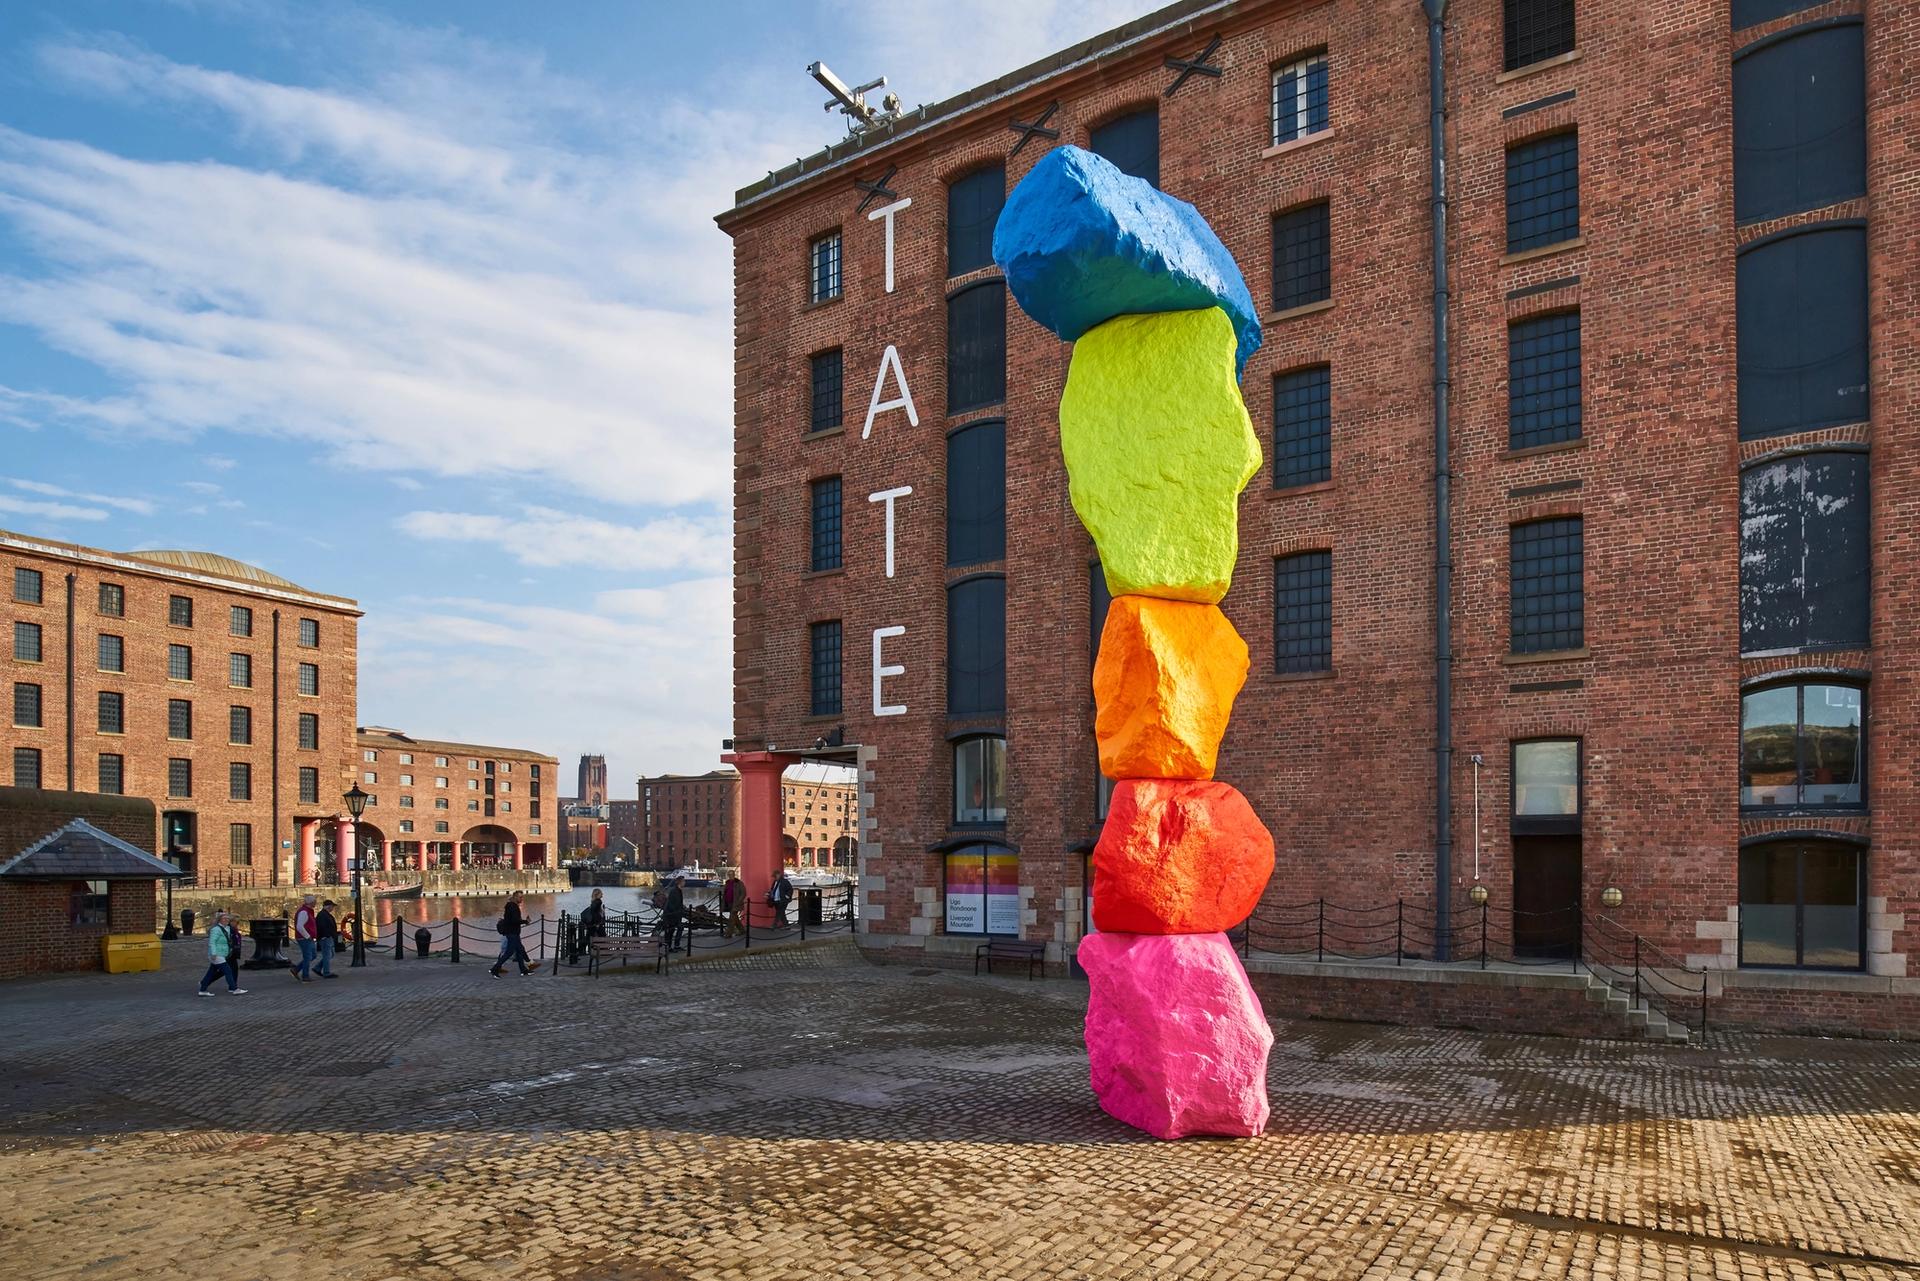 Tate Liverpool has secured part of the funding for its £25m renovation from the UK government © Rob Battersby